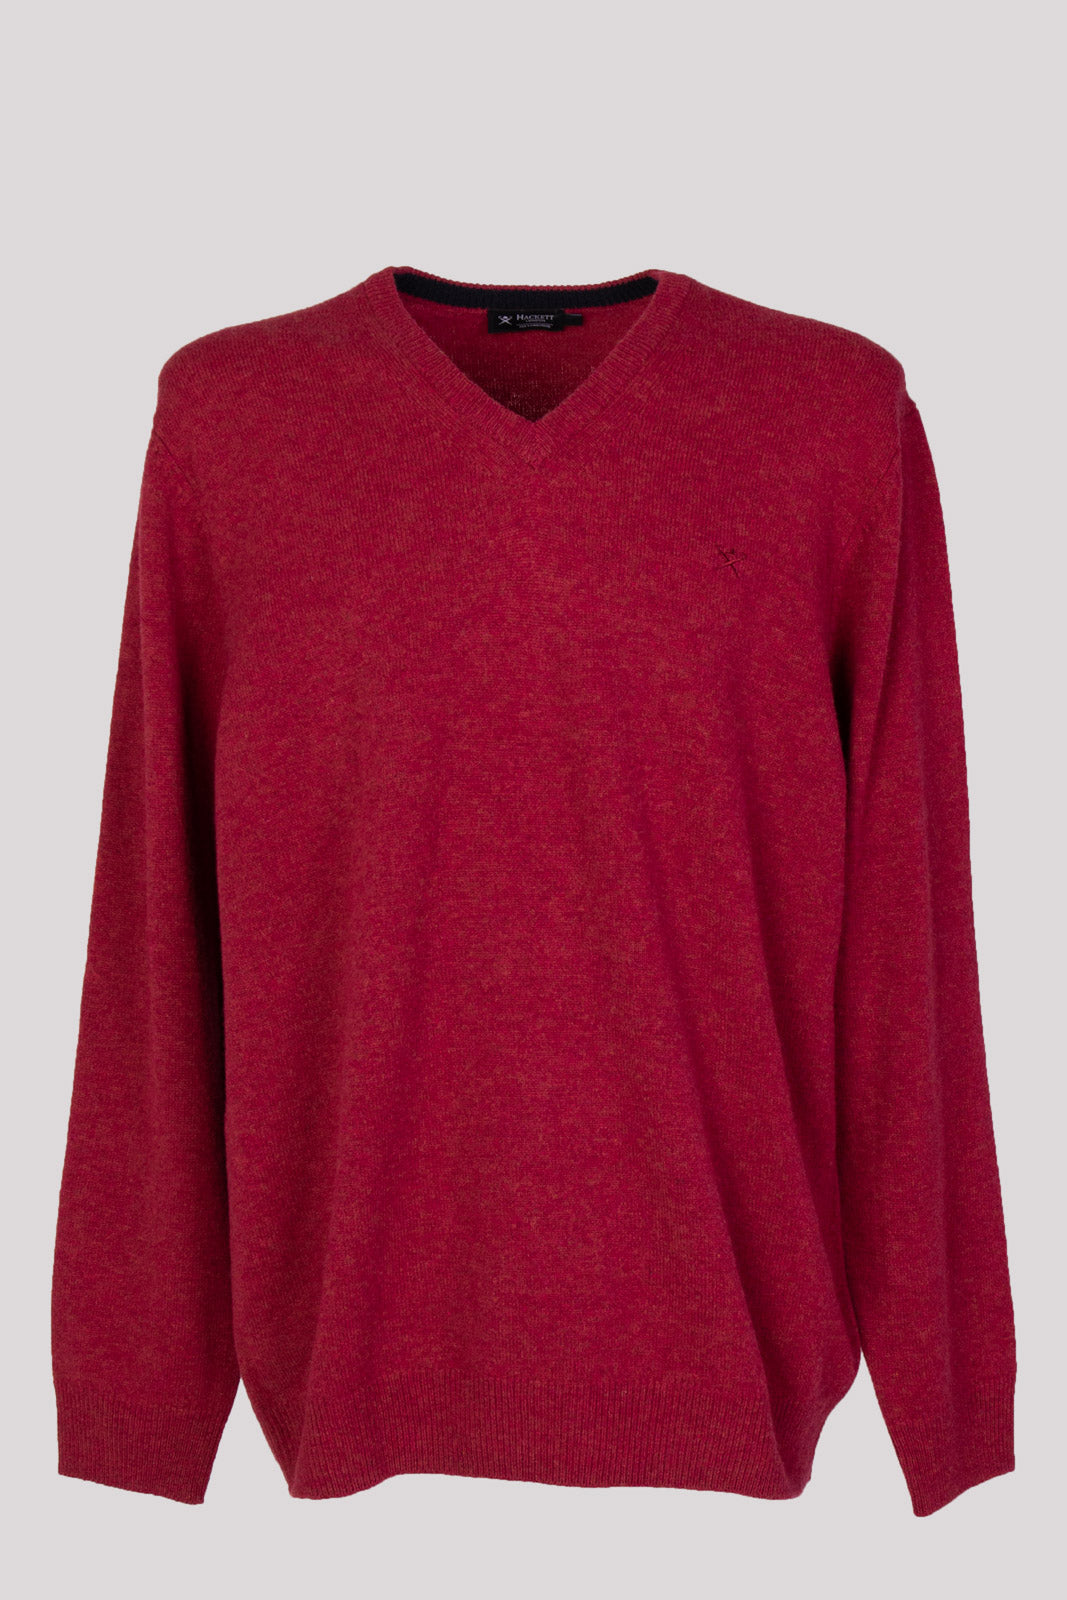 HACKETT Wool Jumper Size 3XL Thin Knit Embroidered Logo Long Sleeve RRP €255 gallery main photo